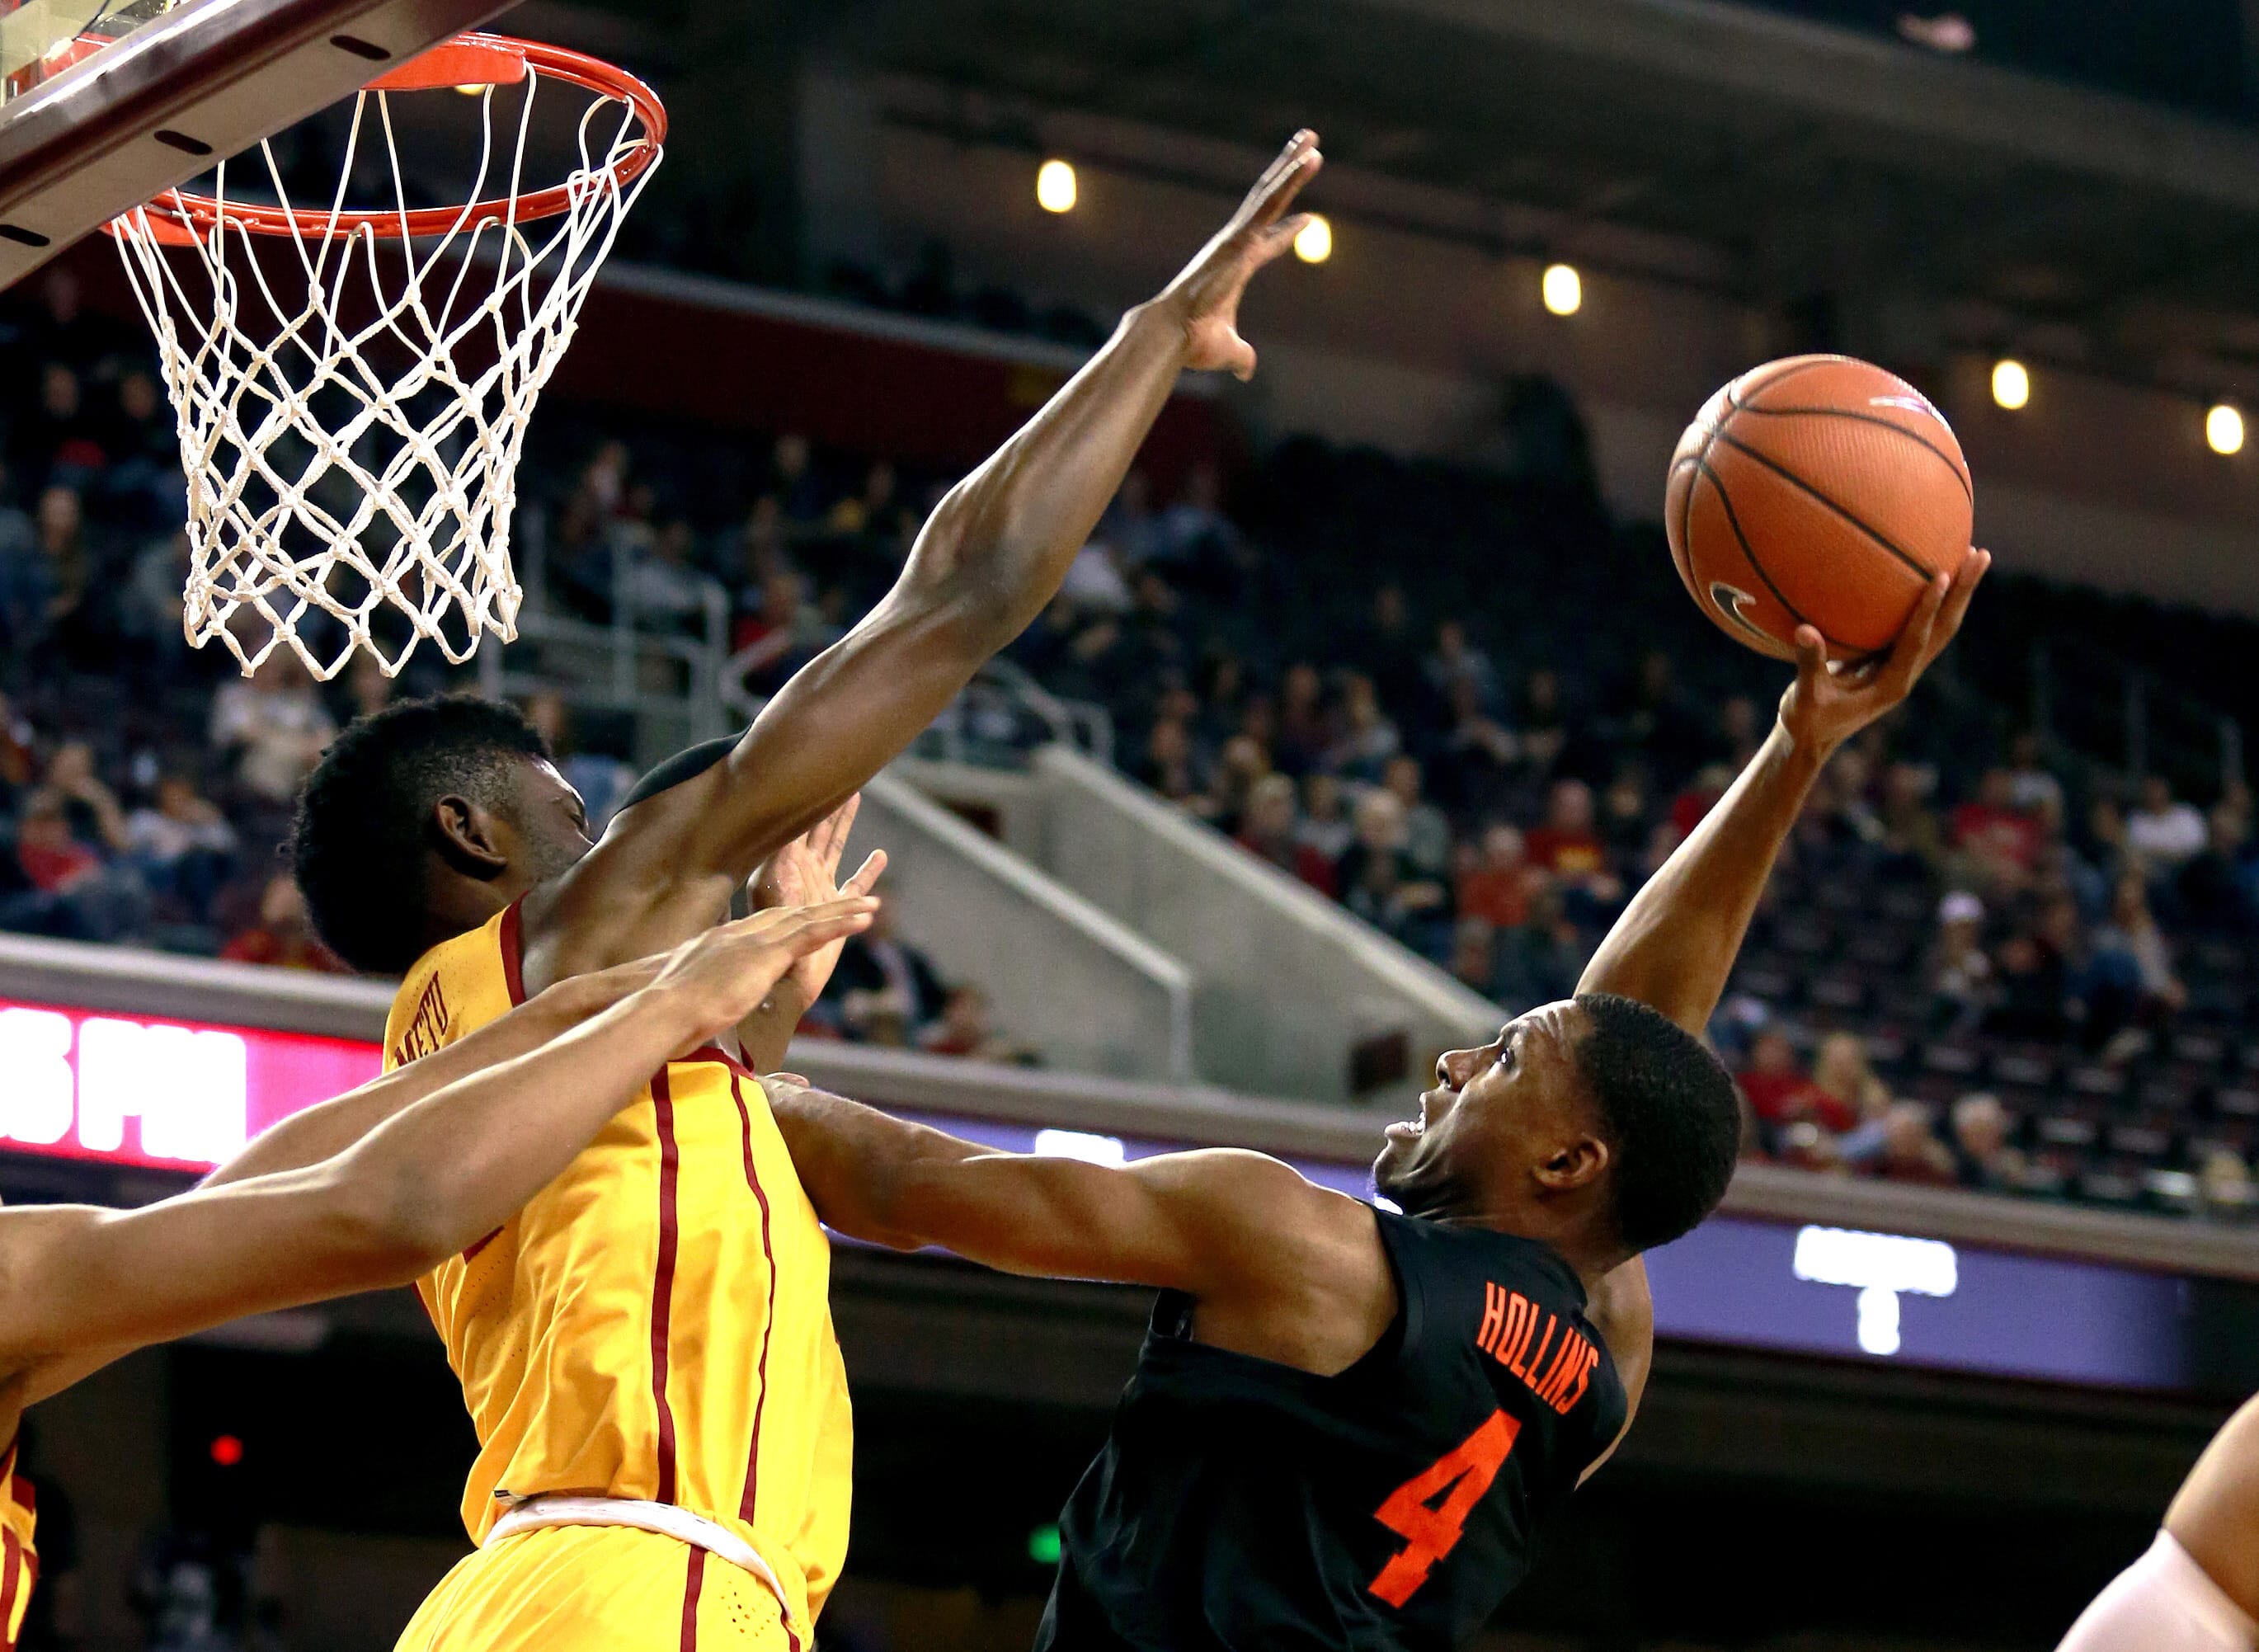 Oregon State forward Alfred Hollins, right, shoots under pressure from Southern California forward Chimezie Metu during the first half of an NCAA college basketball game Saturday, Feb. 17, 2018, in Los Angeles. (AP Photo/Ringo H.W.